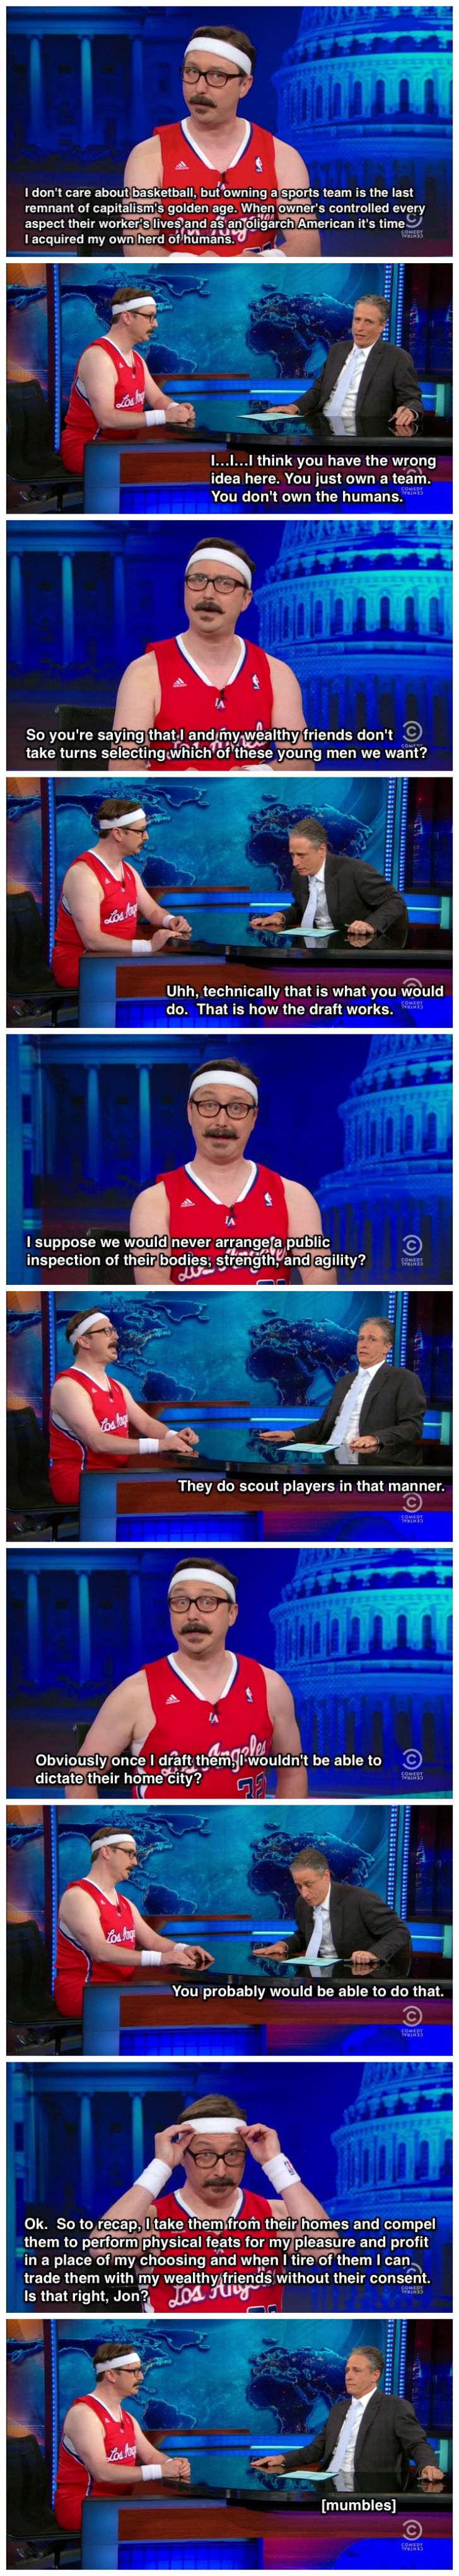 John Hodgman explains to Jon Stewart why he wants to buy the LA Clippers